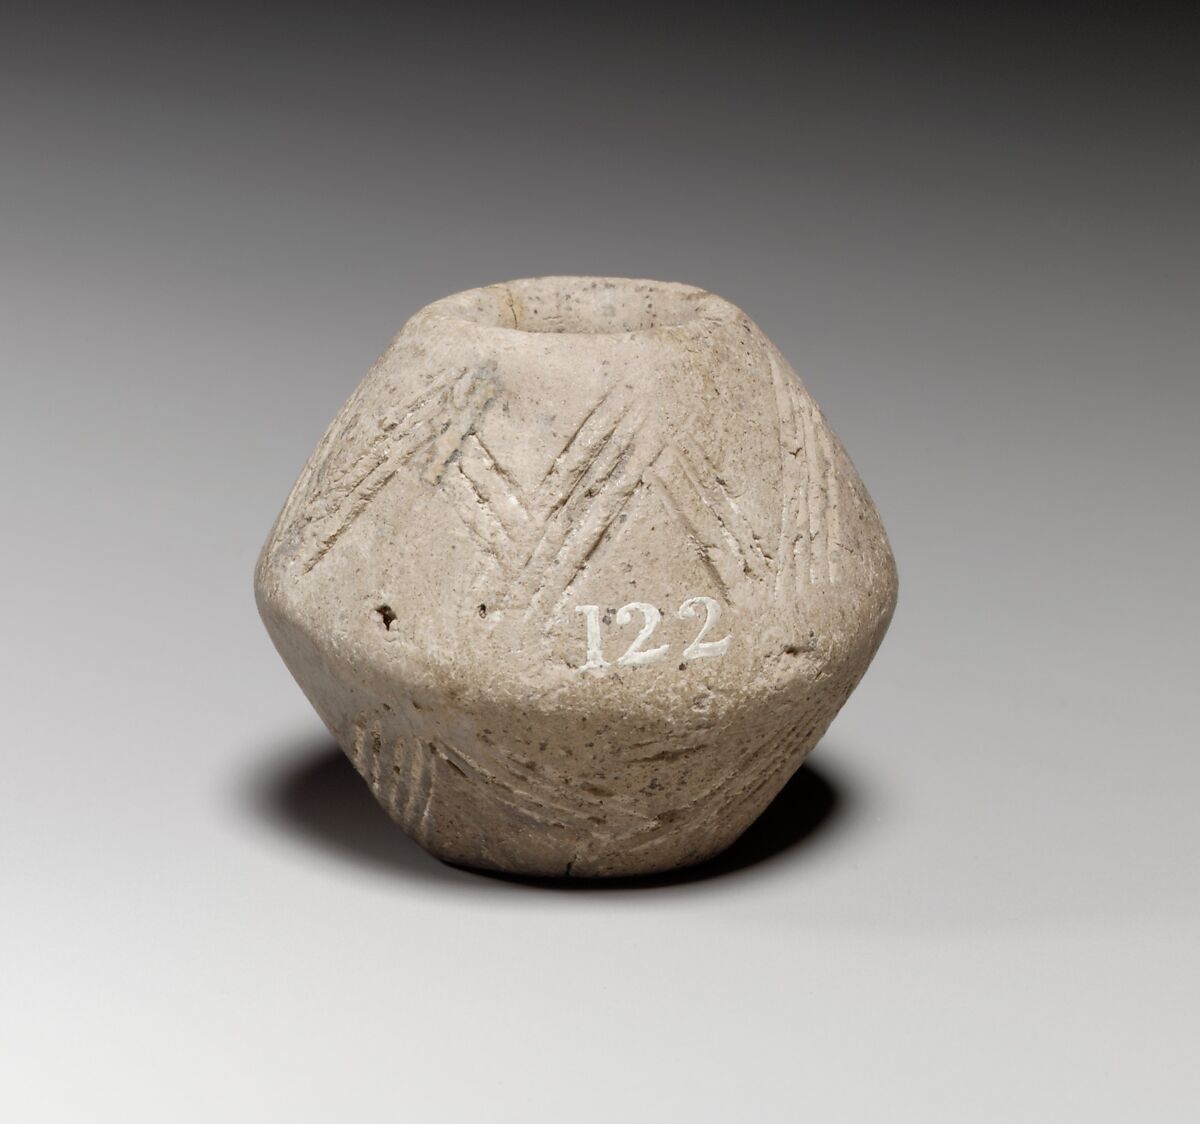 Terracotta biconical spindle-whorl, Terracotta, Cypriot 